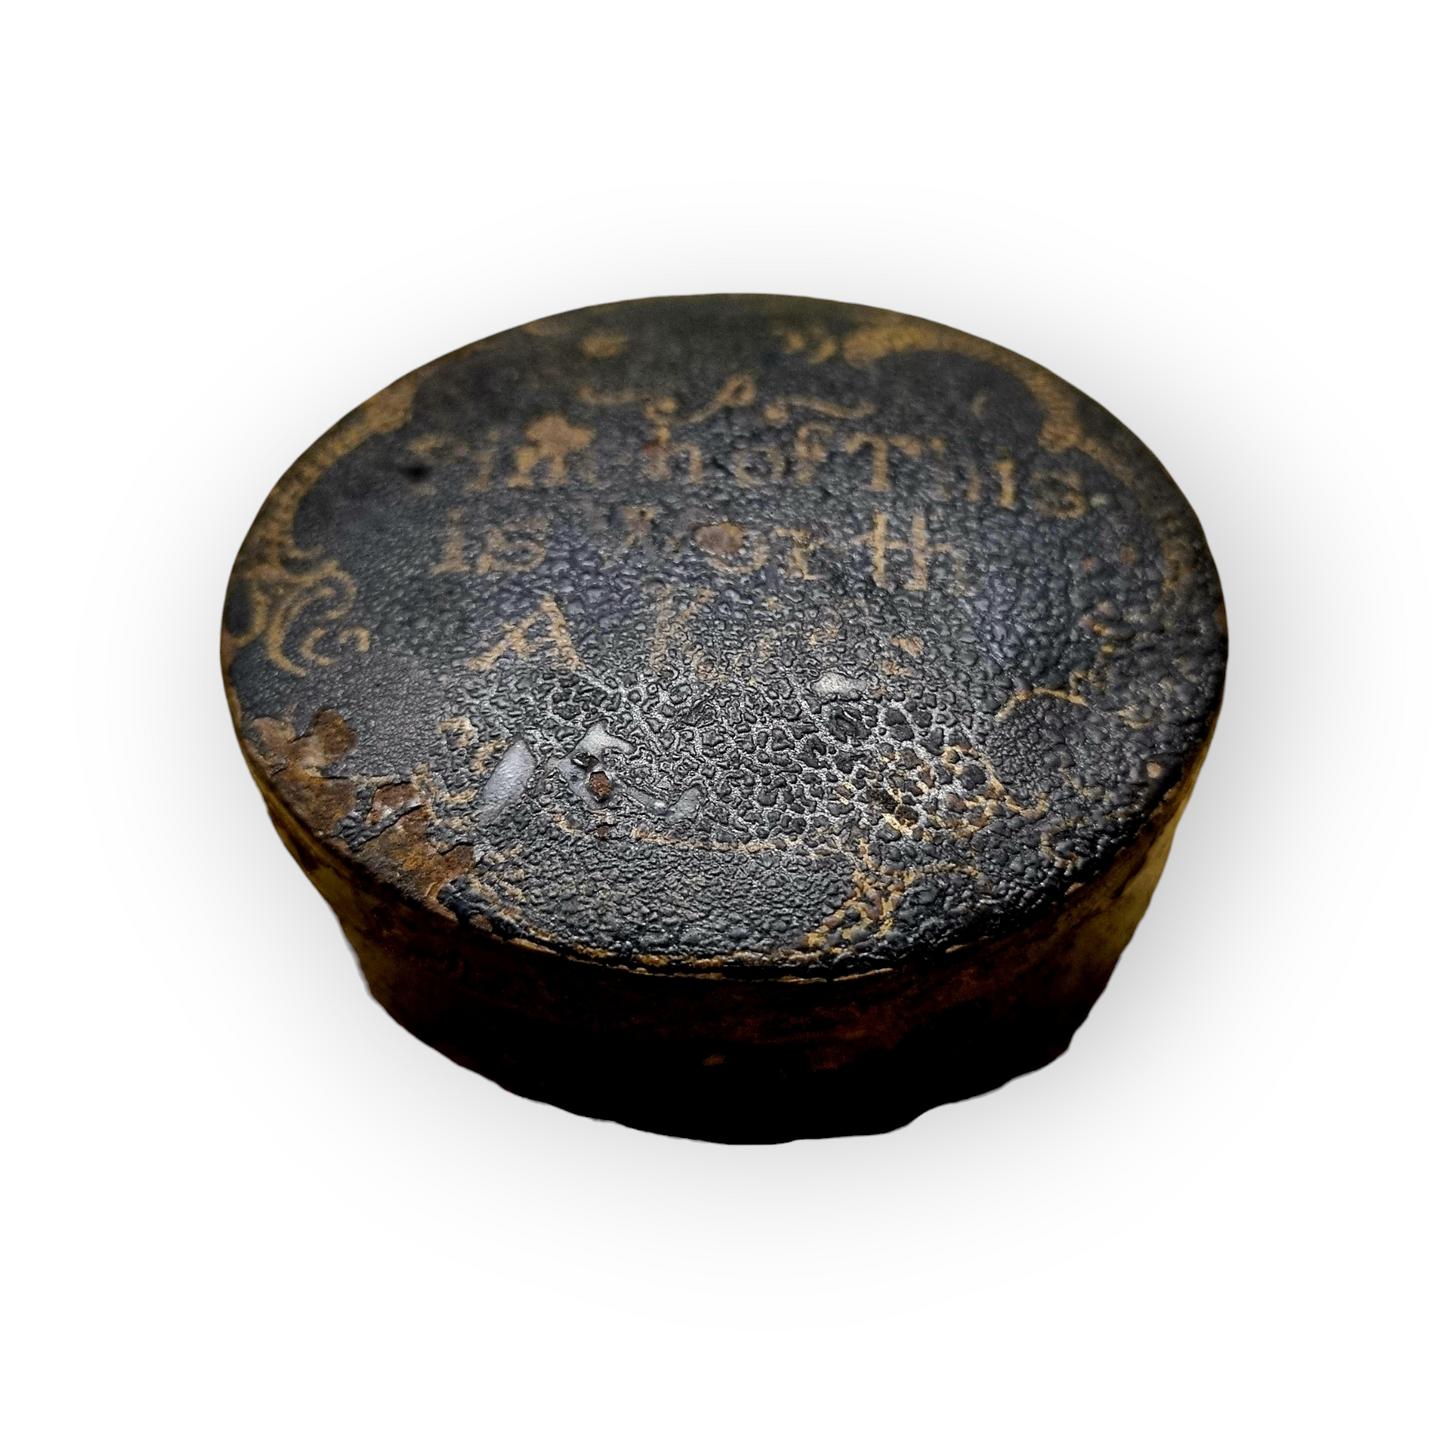 Late 18th Century English Antique Toleware Tobacco Snuff Box, Bearing The Inscription "A pinch of this is worth a kiss"